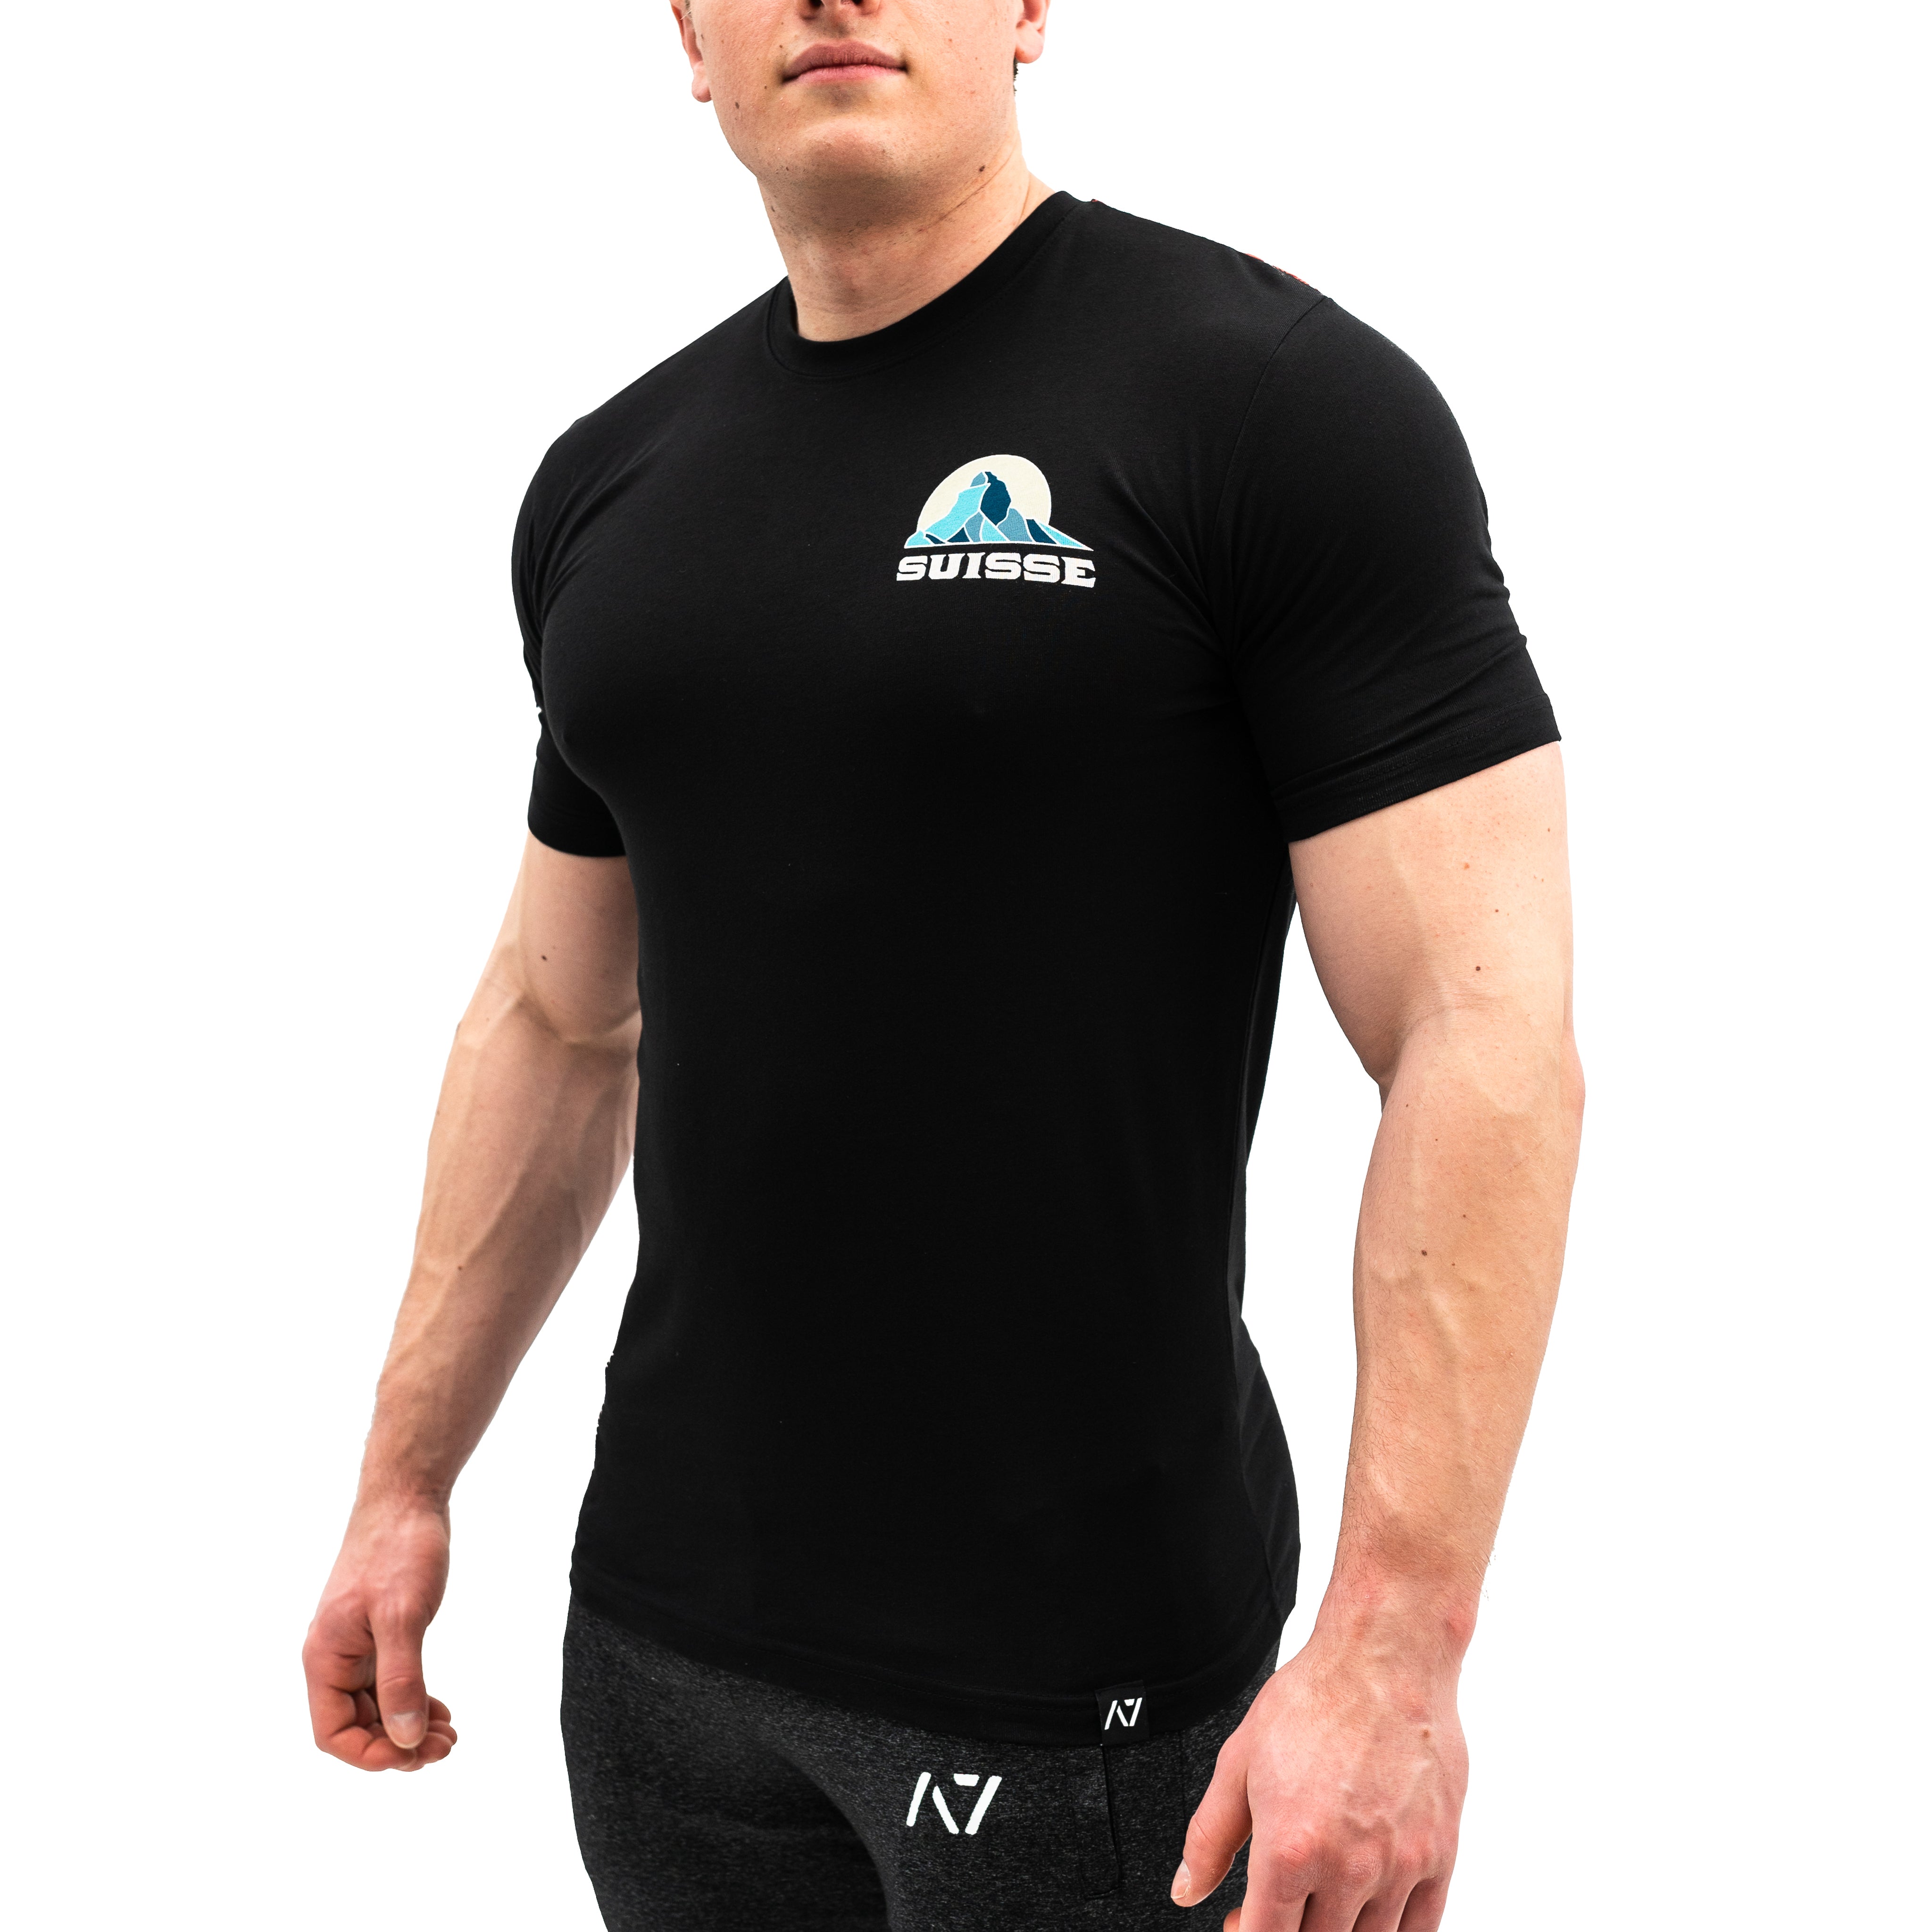 A7 Switzerland Bar Grip T-shirt, great as a squat shirt. Purchase A7 Switzerland Bar Grip Shirt from A7 UK. Purchase Switzerland Bar Grip Shirt Europe from A7 Europe. No more chalk and no more sliding. Best Bar Grip T shirts, shipping to UK and Europe from A7 UK. A7 Switzerland Bar Grip Shirt  great for powerlifting in Switzerland. A7UK has the best Powerlifting apparel for all your workouts. Available in UK and Europe including France, Italy, Germany, the Netherlands, Sweden and Poland.